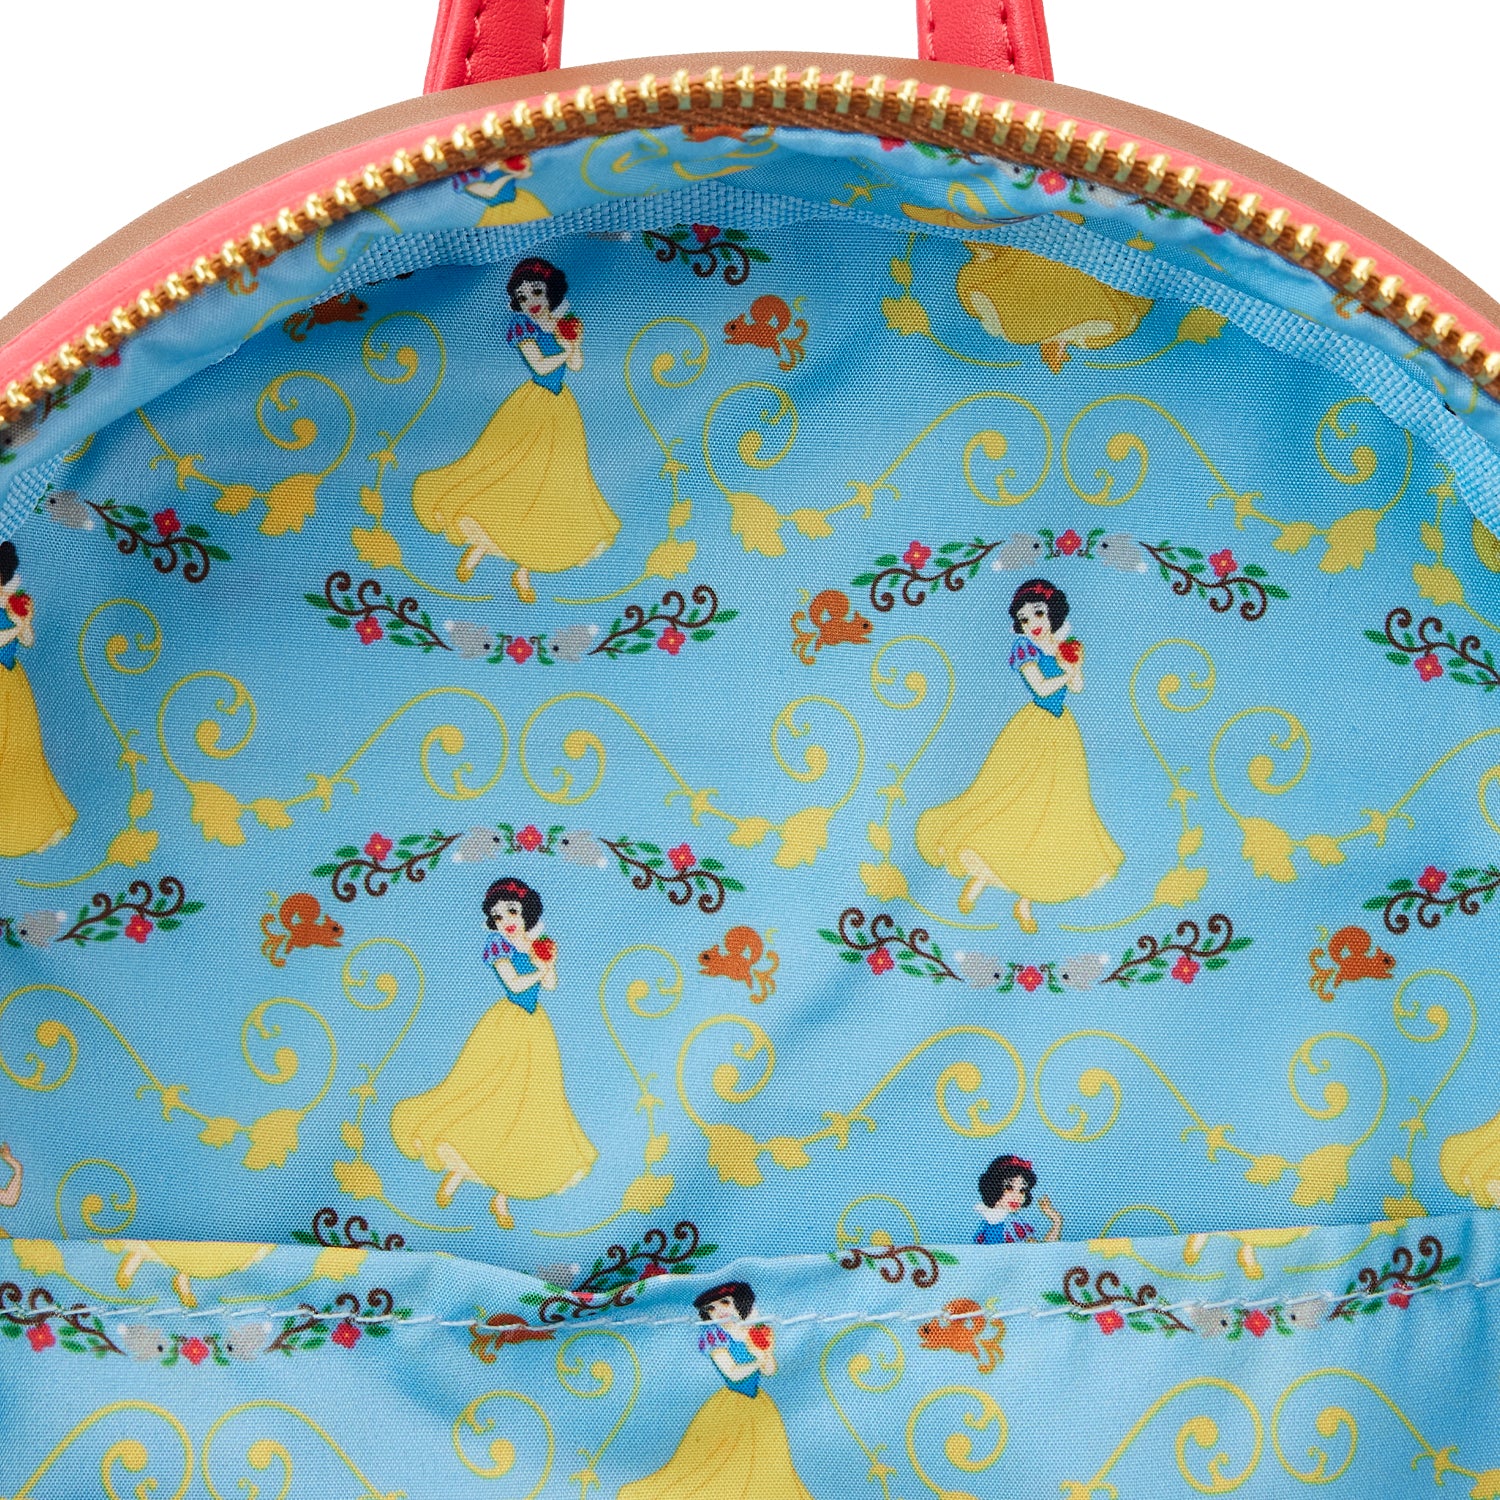 Loungefly to Release Snow White and Dopey Mini-Backpack and Wallet